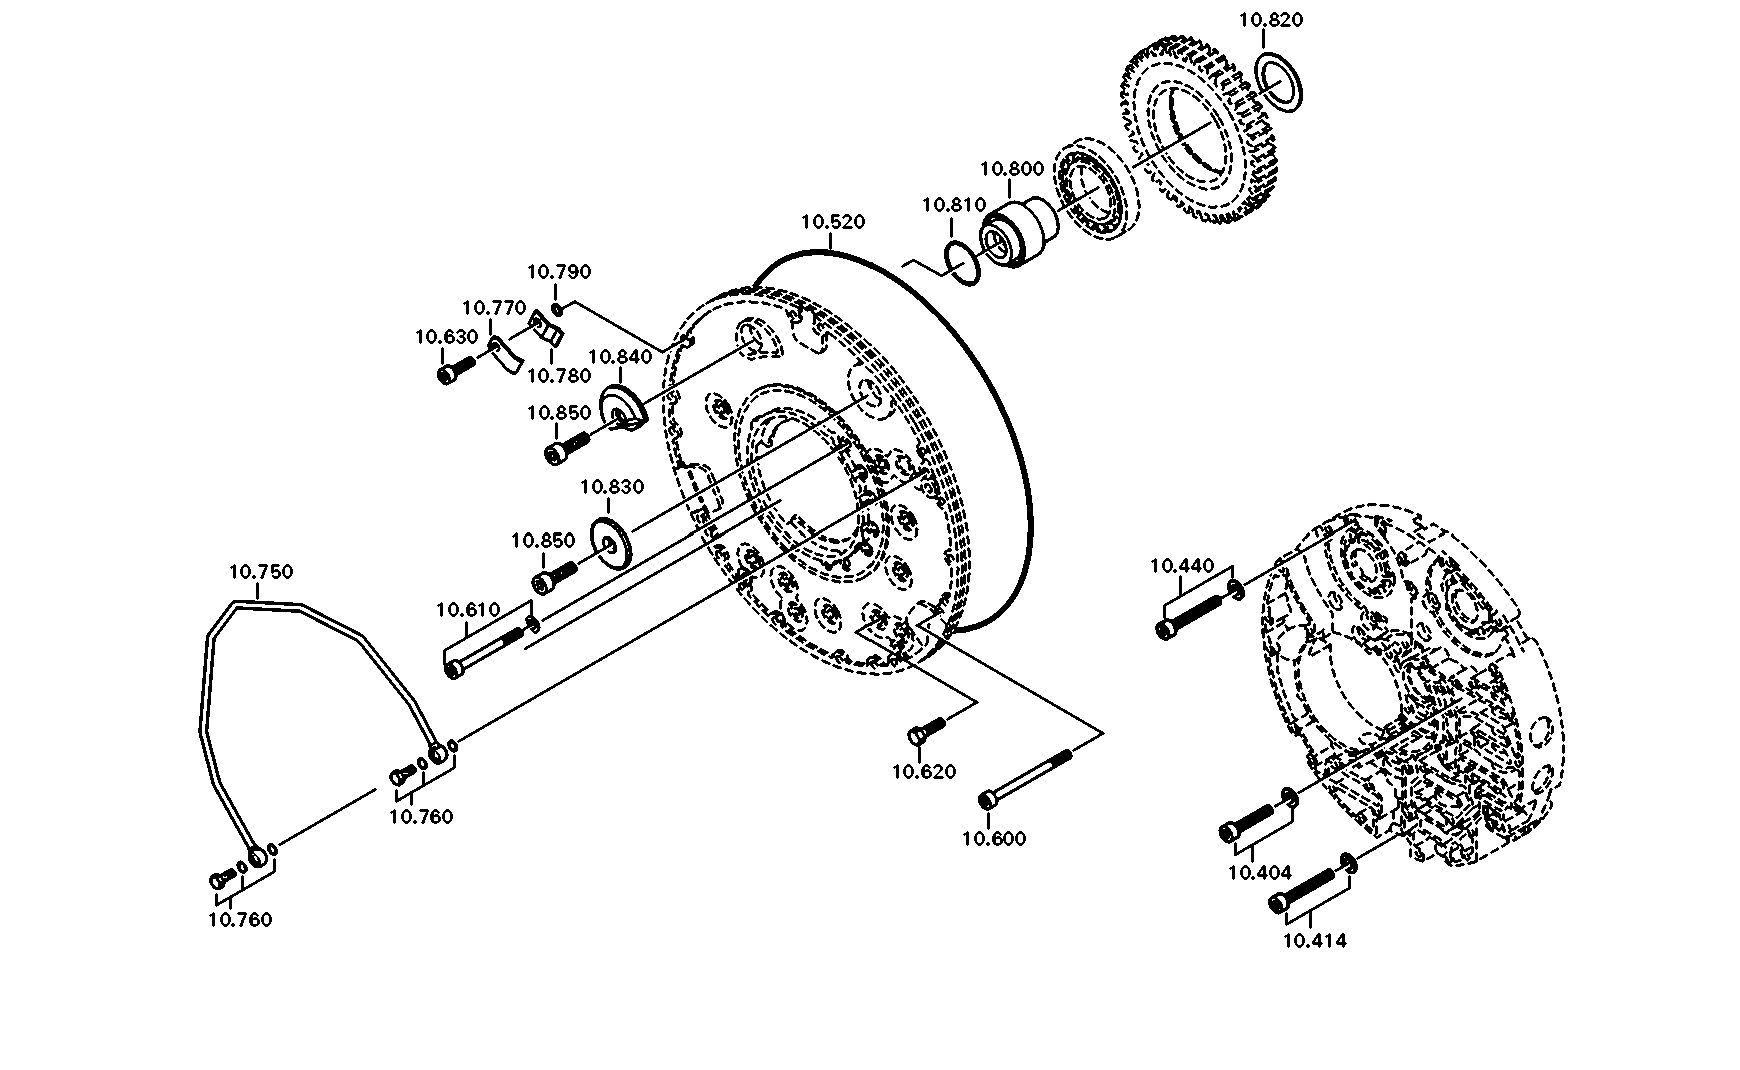 drawing for LIEBHERR GMBH 10028176 - TUBE (figure 3)